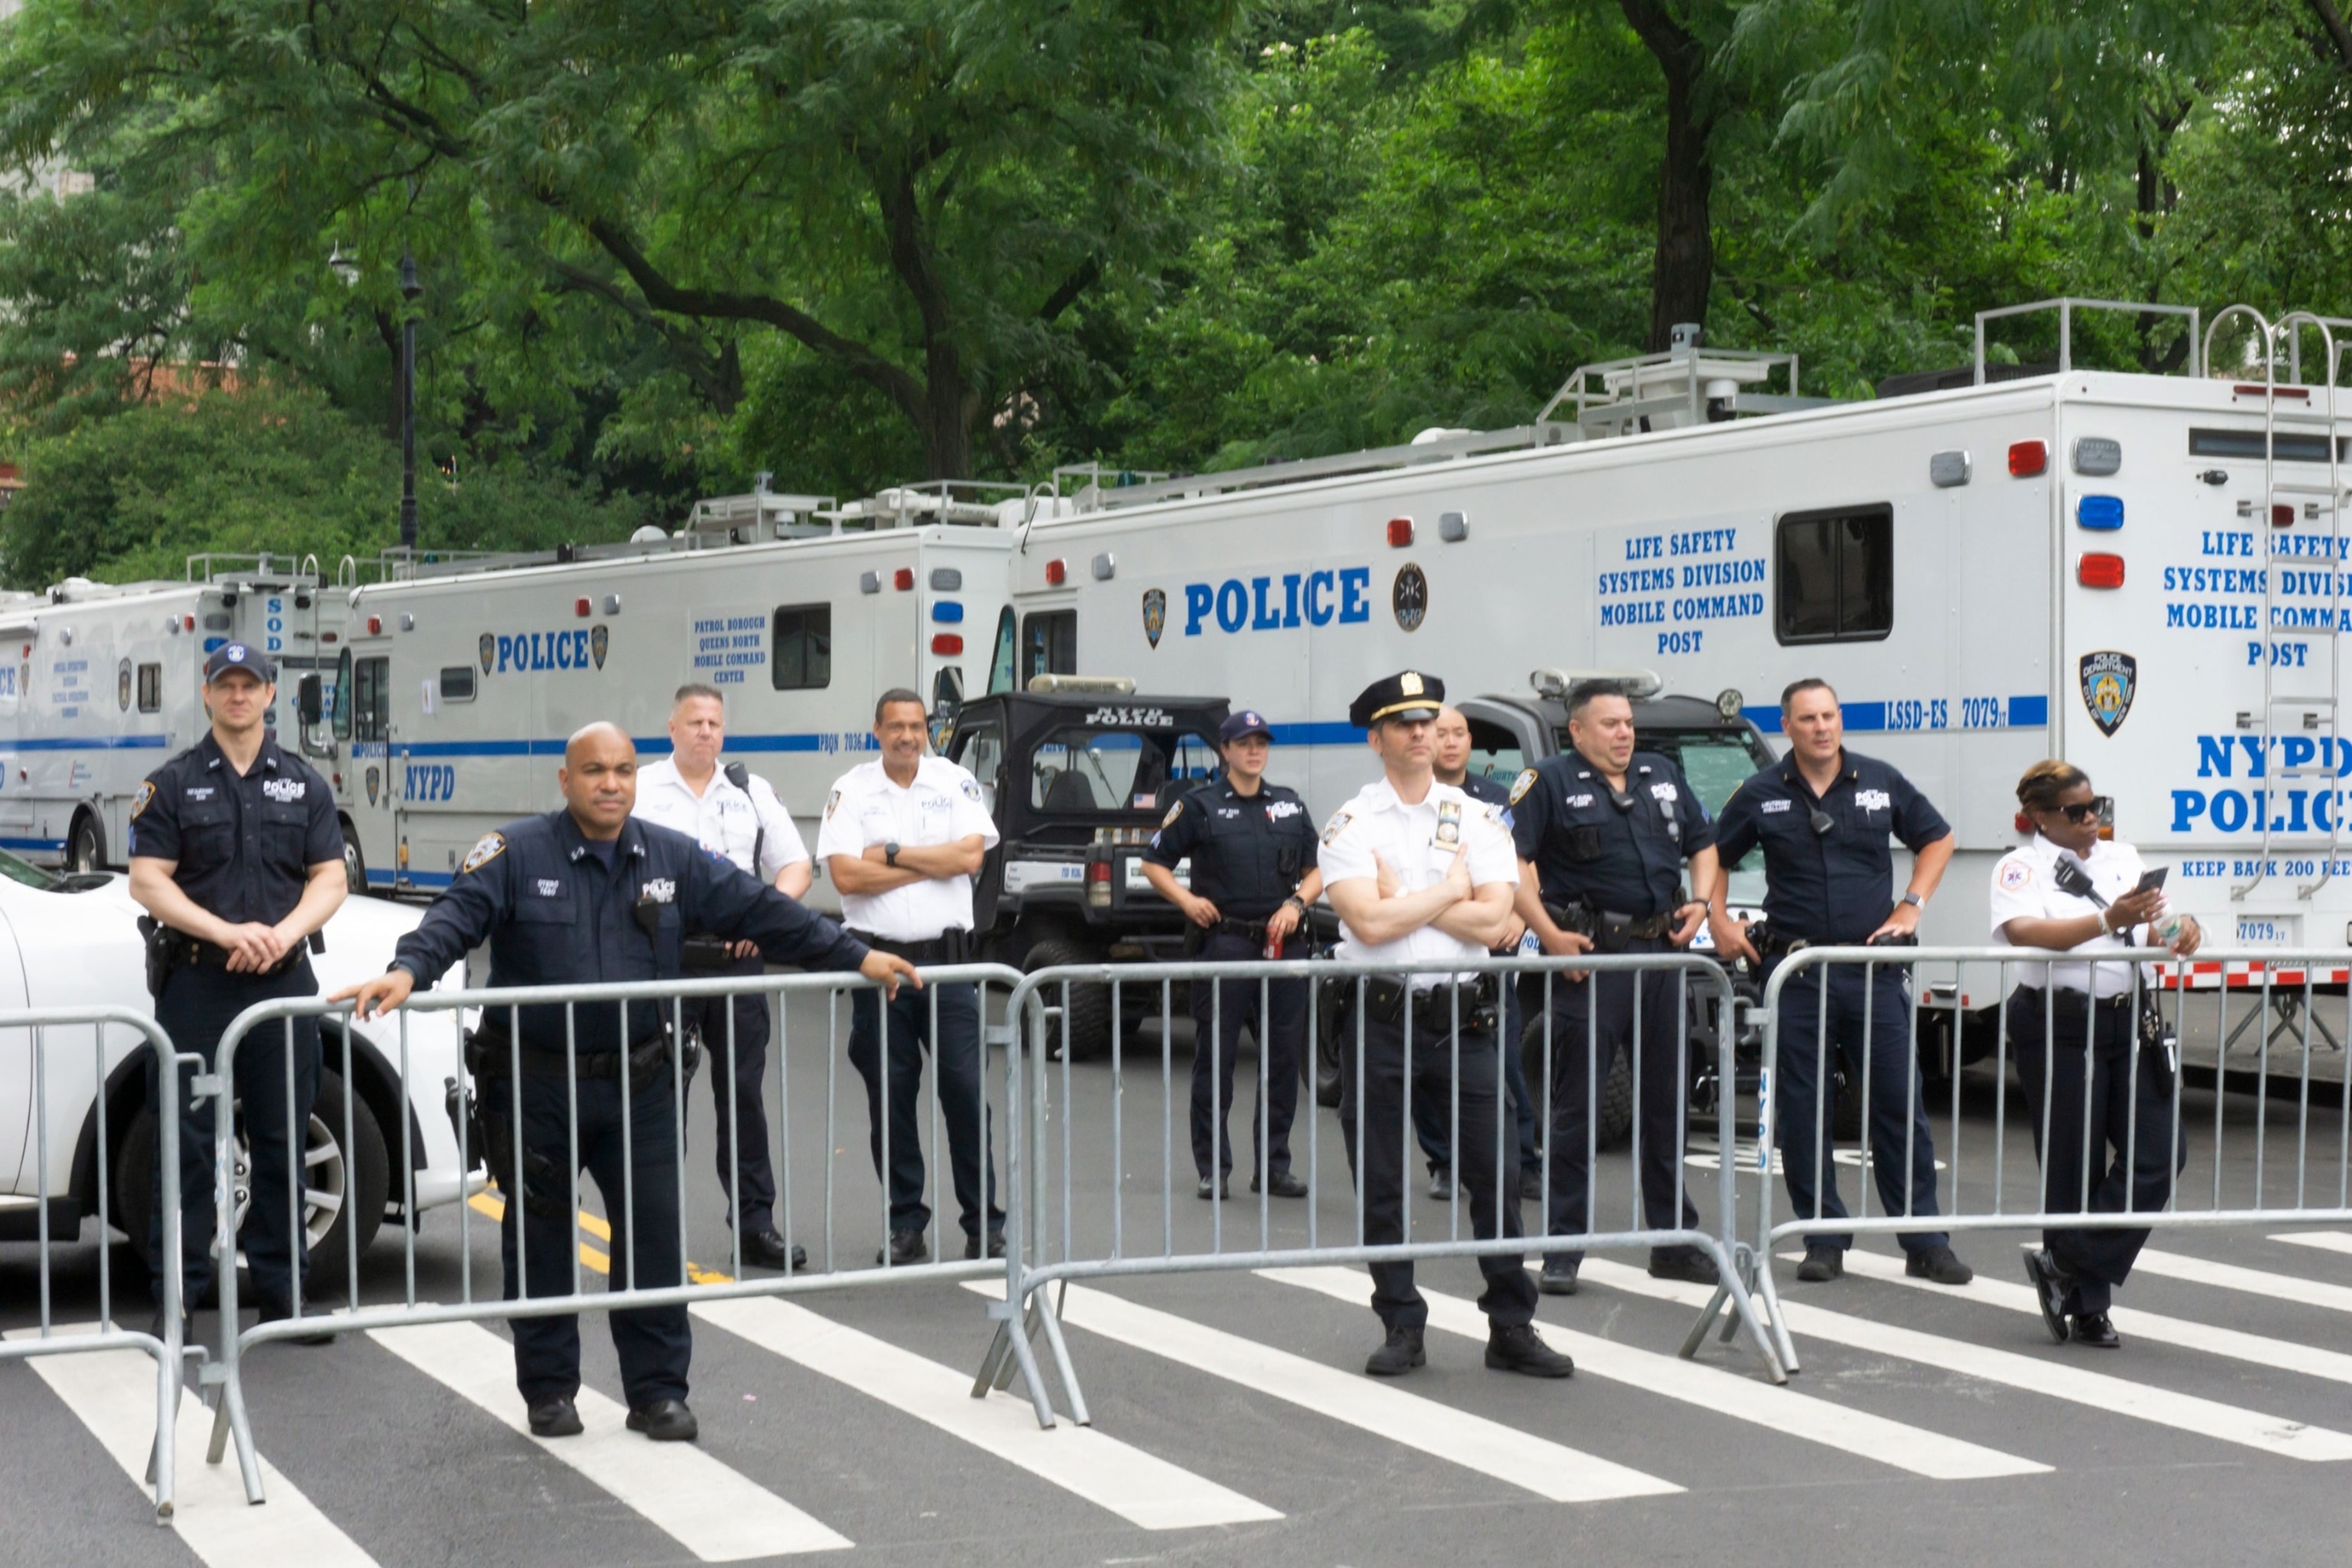 PHOTO: In this June 25, 2023, file photo, New York City Police Department officers, standing behind a bicycle rack barricade and in front of 3 large NYPD Mobile Command Post vehicles, monitor the NYC Pride March 2023, near Christopher Street in New York.